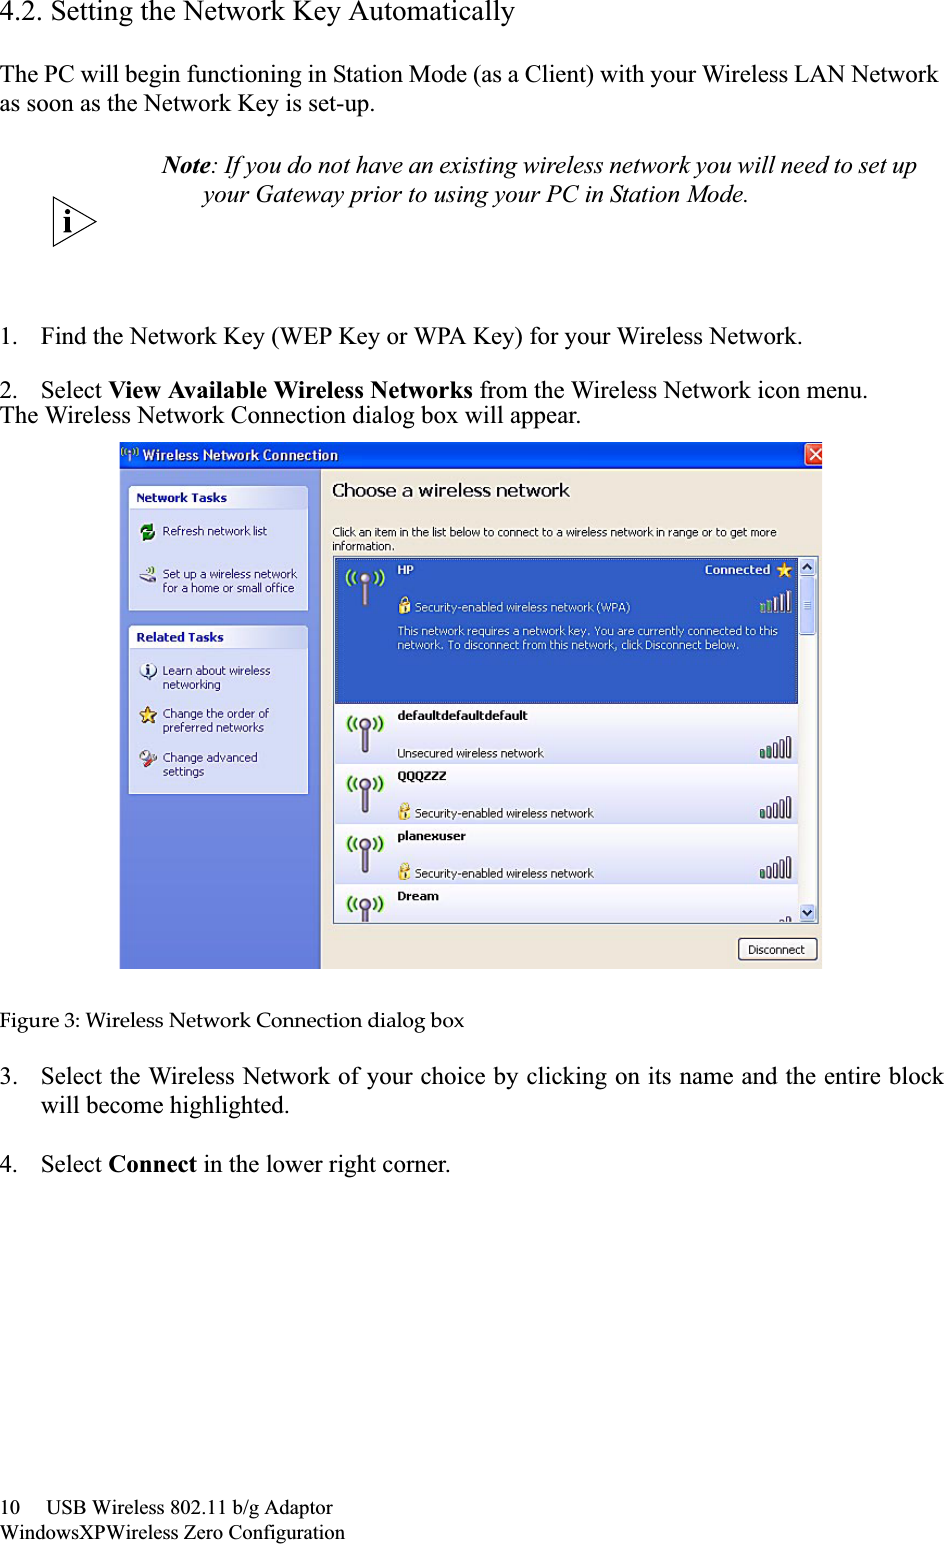 10     USB Wireless 802.11 b/g AdaptorWindowsXPWireless Zero Configuration4.2. Setting the Network Key AutomaticallyThe PC will begin functioning in Station Mode (as a Client) with your Wireless LAN Network as soon as the Network Key is set-up.1. Find the Network Key (WEP Key or WPA Key) for your Wireless Network.2. Select View Available Wireless Networks from the Wireless Network icon menu.The Wireless Network Connection dialog box will appear.Figureȱ3:ȱWirelessȱNetworkȱConnectionȱdialogȱbox3. Select the Wireless Network of your choice by clicking on its name and the entire blockwill become highlighted.4. Select Connect in the lower right corner.Note: If you do not have an existing wireless network you will need to set upyour Gateway prior to using your PC in Station Mode.